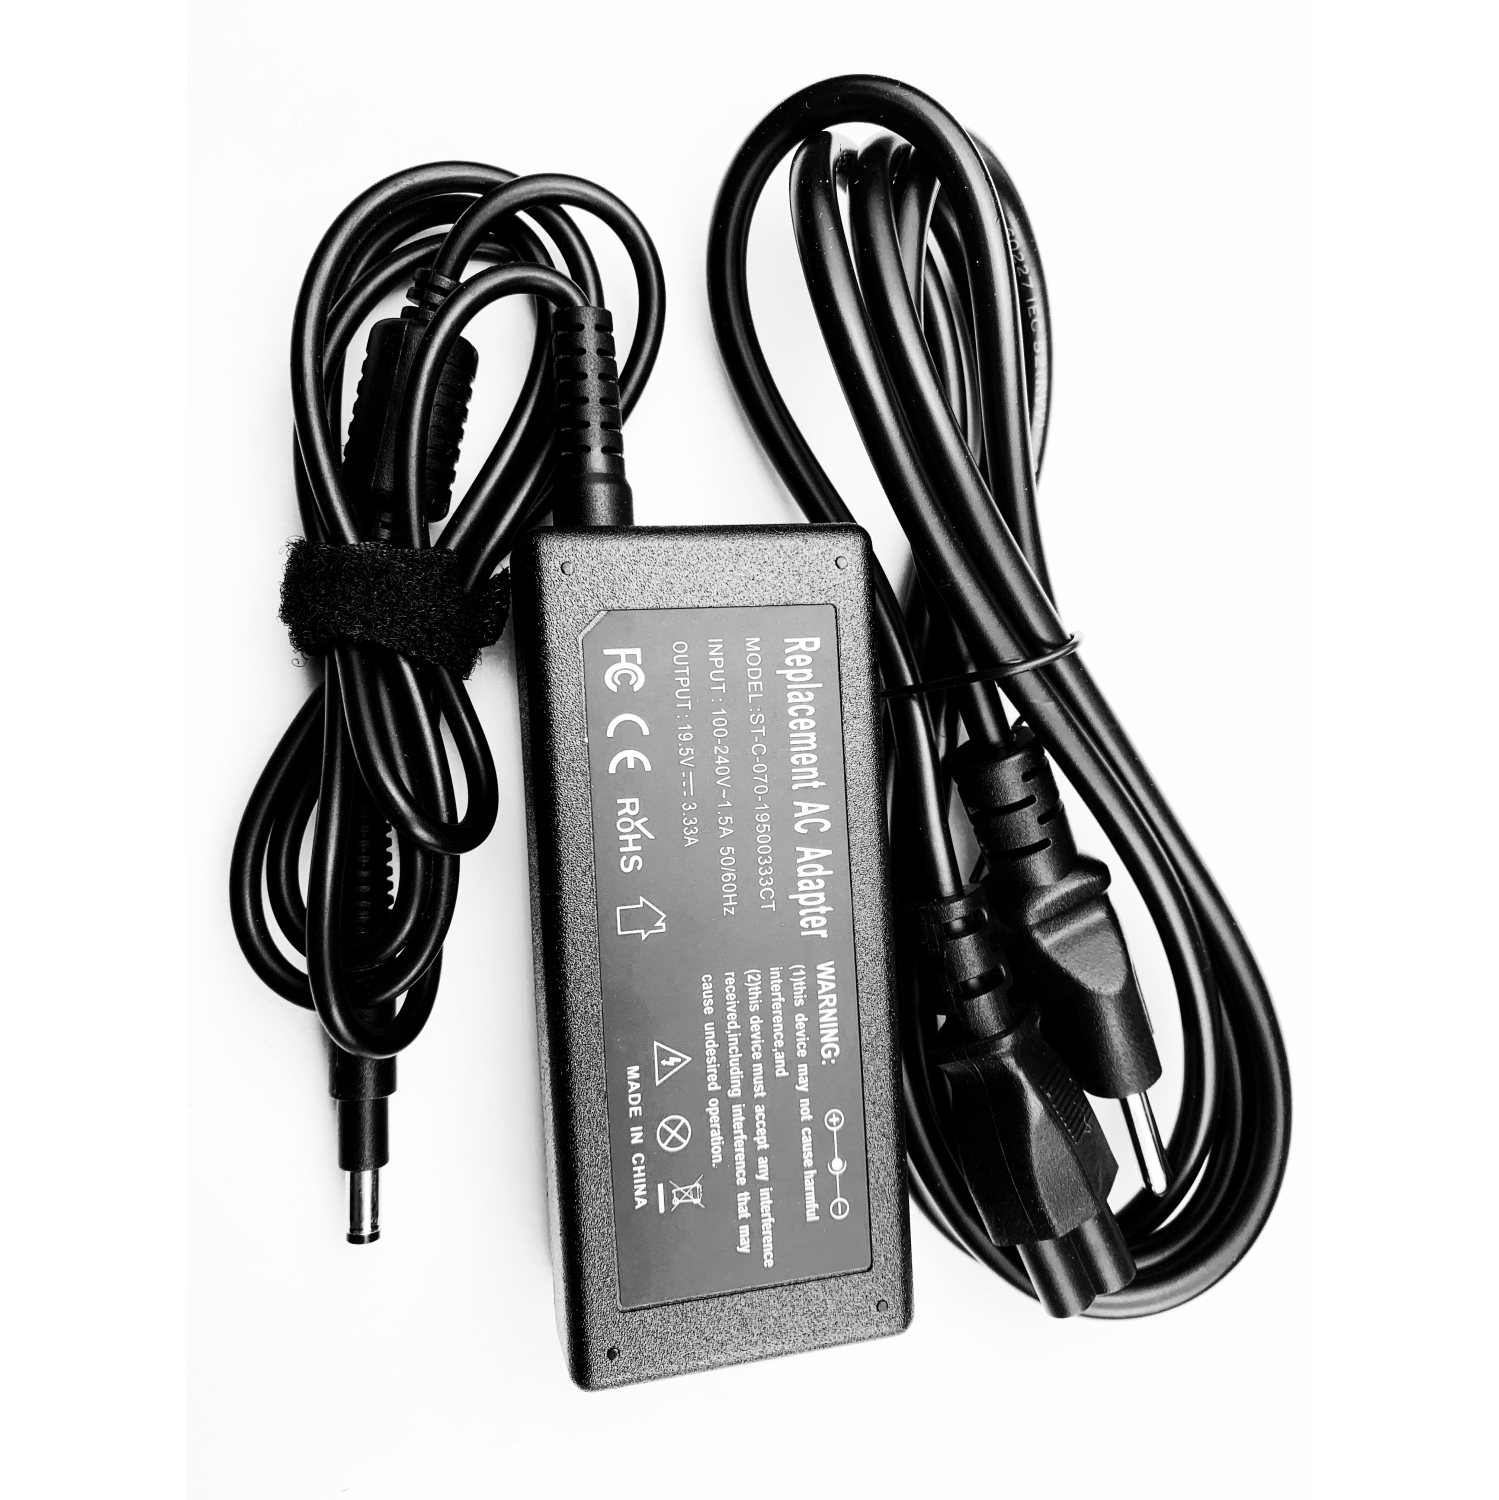 19.5V 65W 4.75mm x 1.7mm new AC adapter power cord charger for HP VE023AA VE023AA#ABA